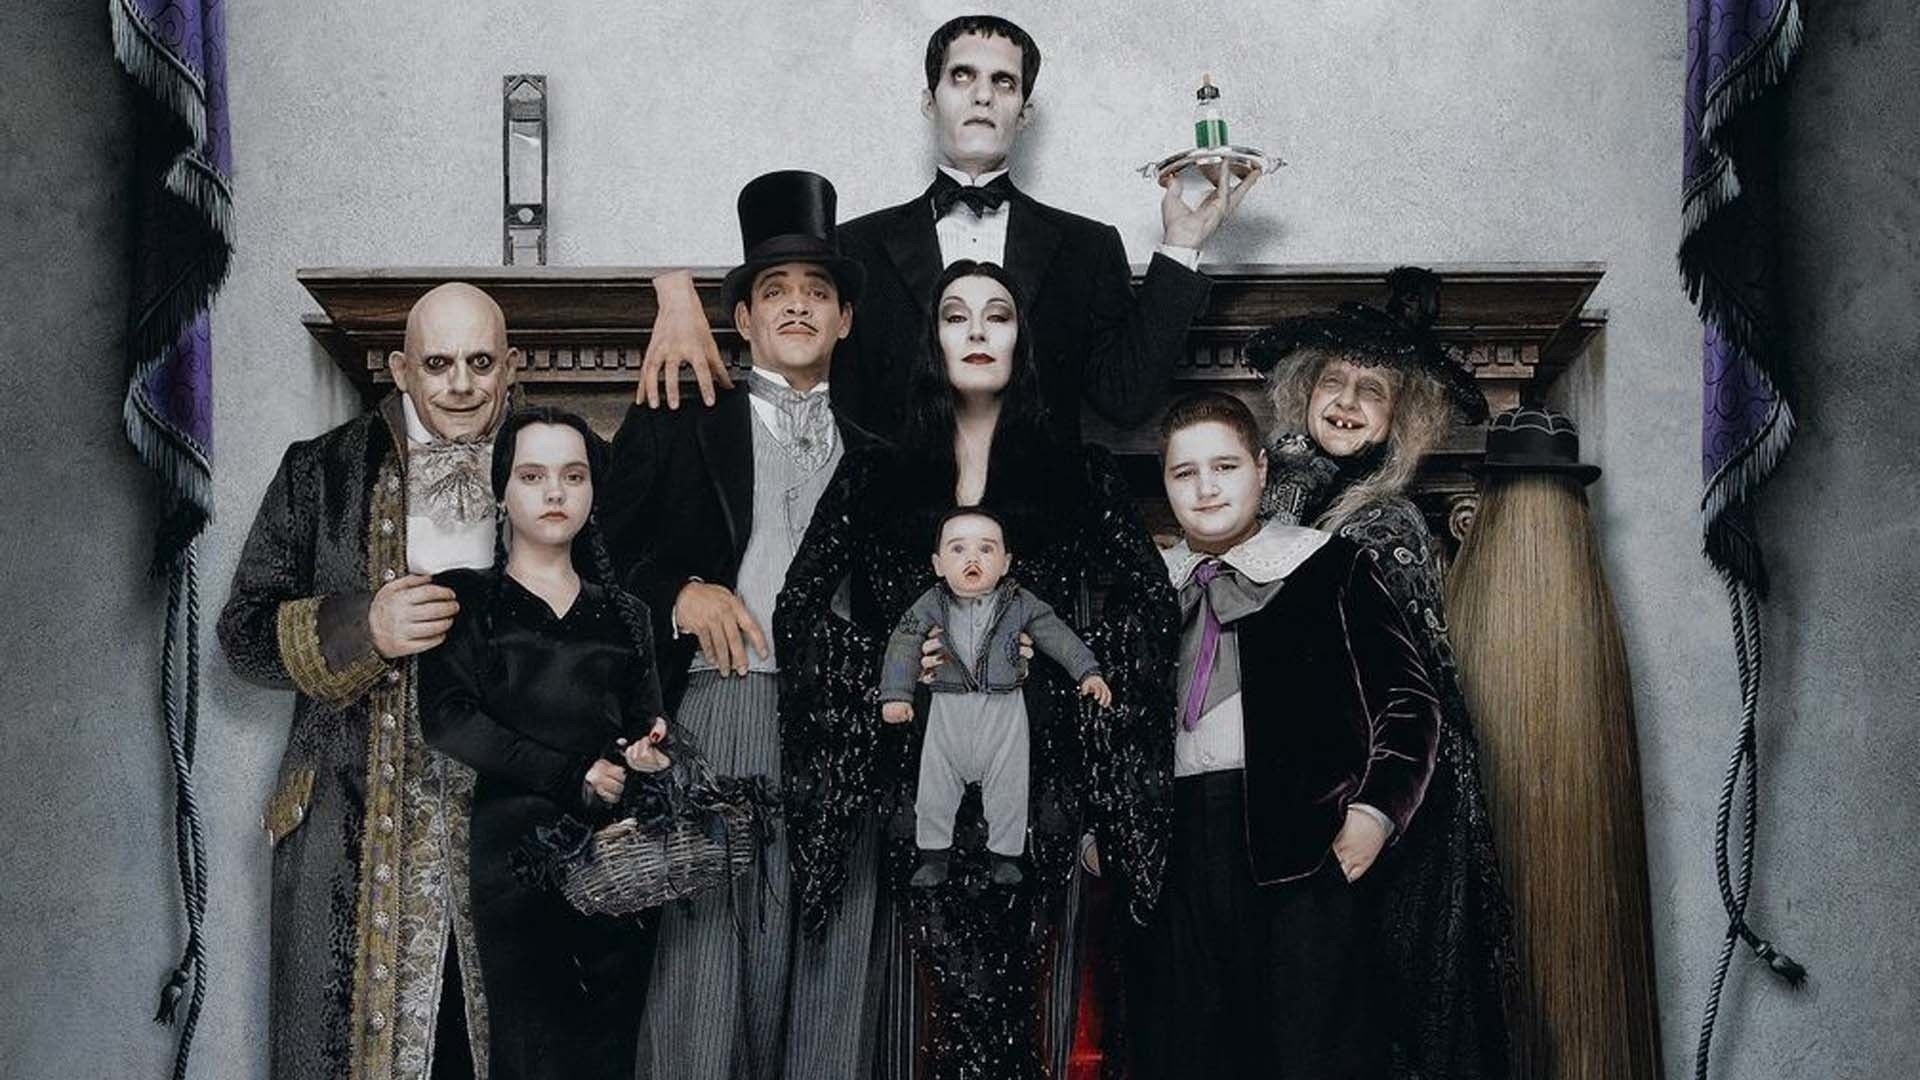 The Addams Family, HD wallpapers, Haunting backgrounds, Iconic characters, 1920x1080 Full HD Desktop